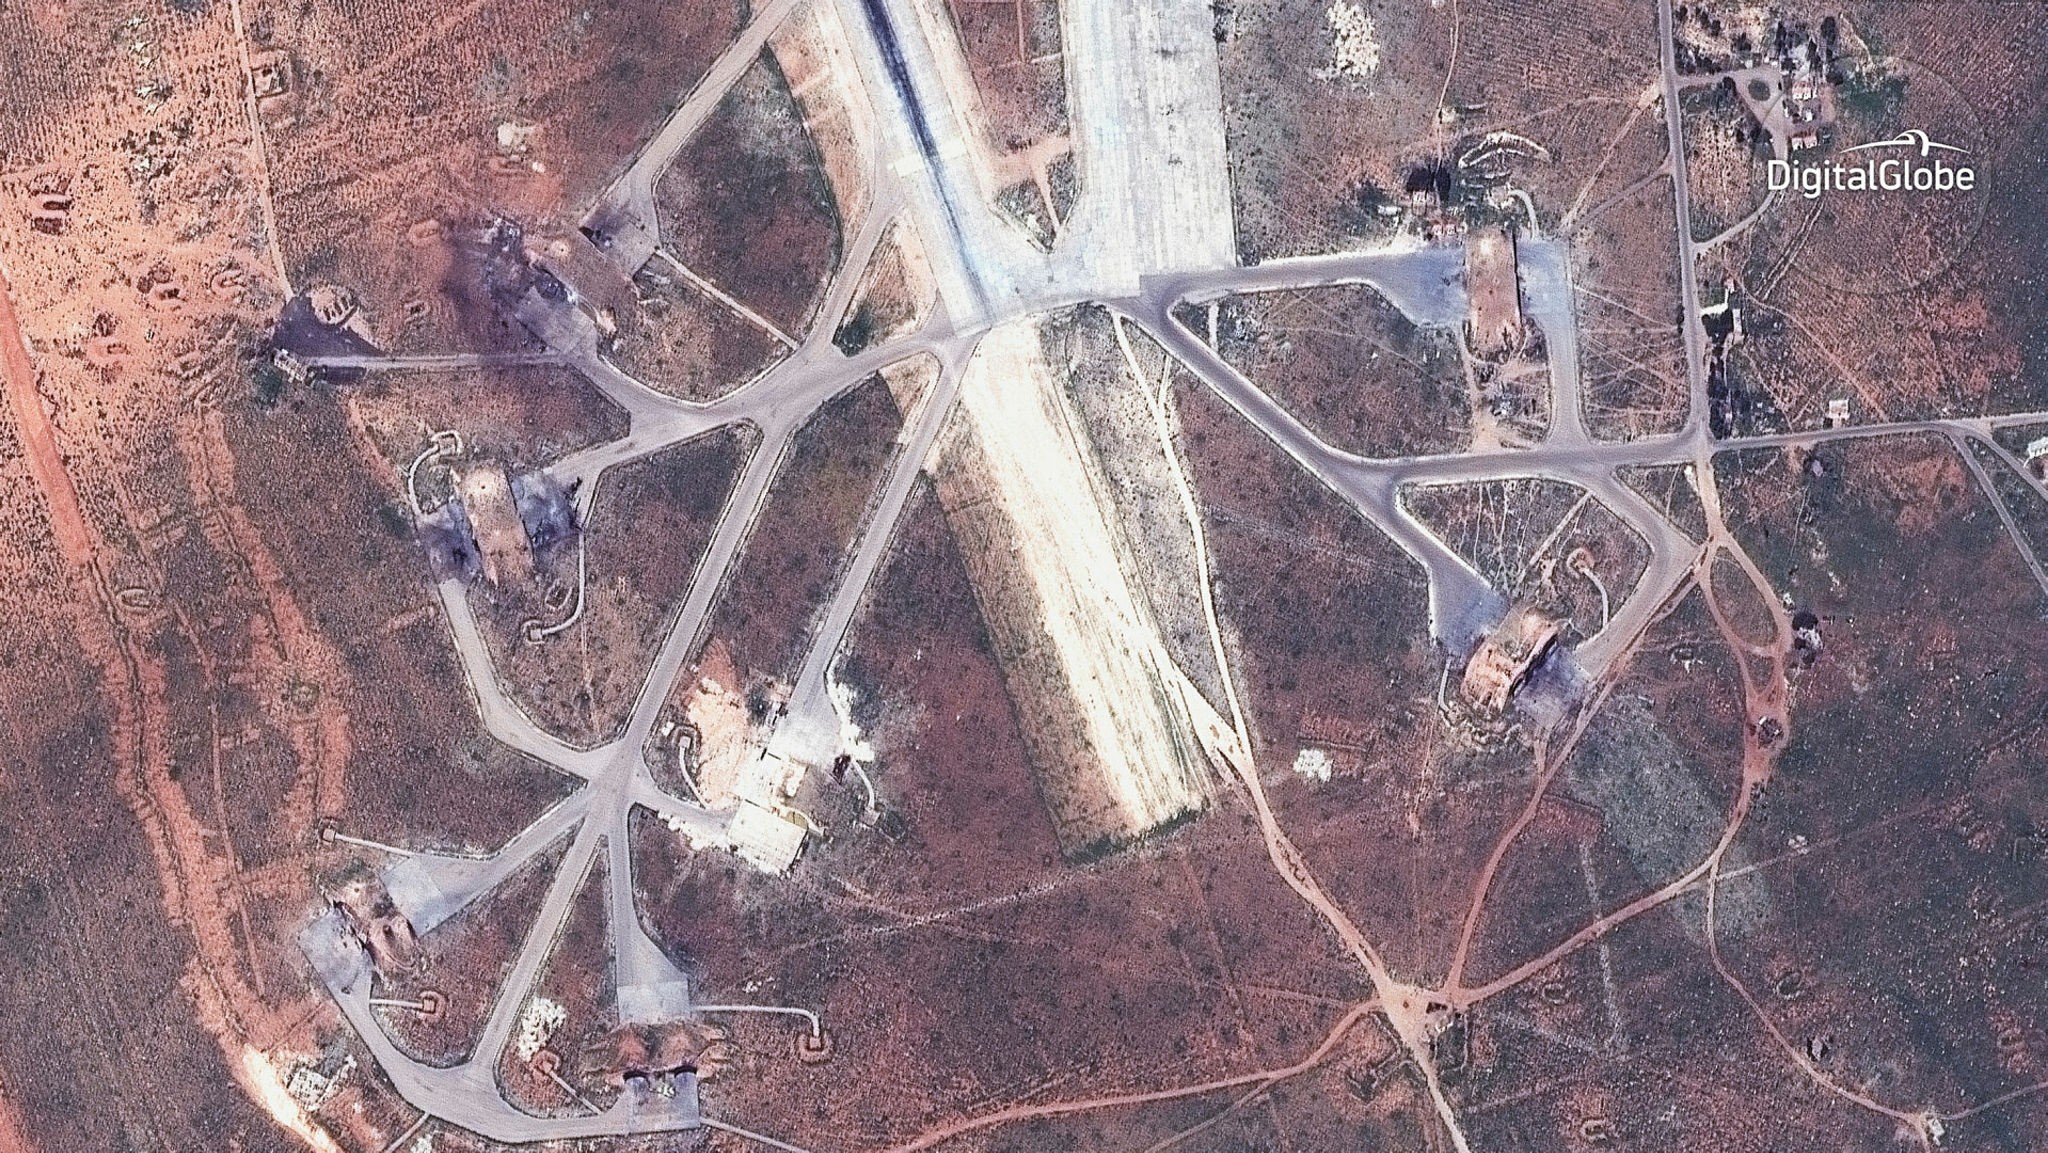 Image captured on April 7 of destroyed aircraft shelters on the southeast side of the Shayrat air base in Syria. (DigitalGlobe via AP)